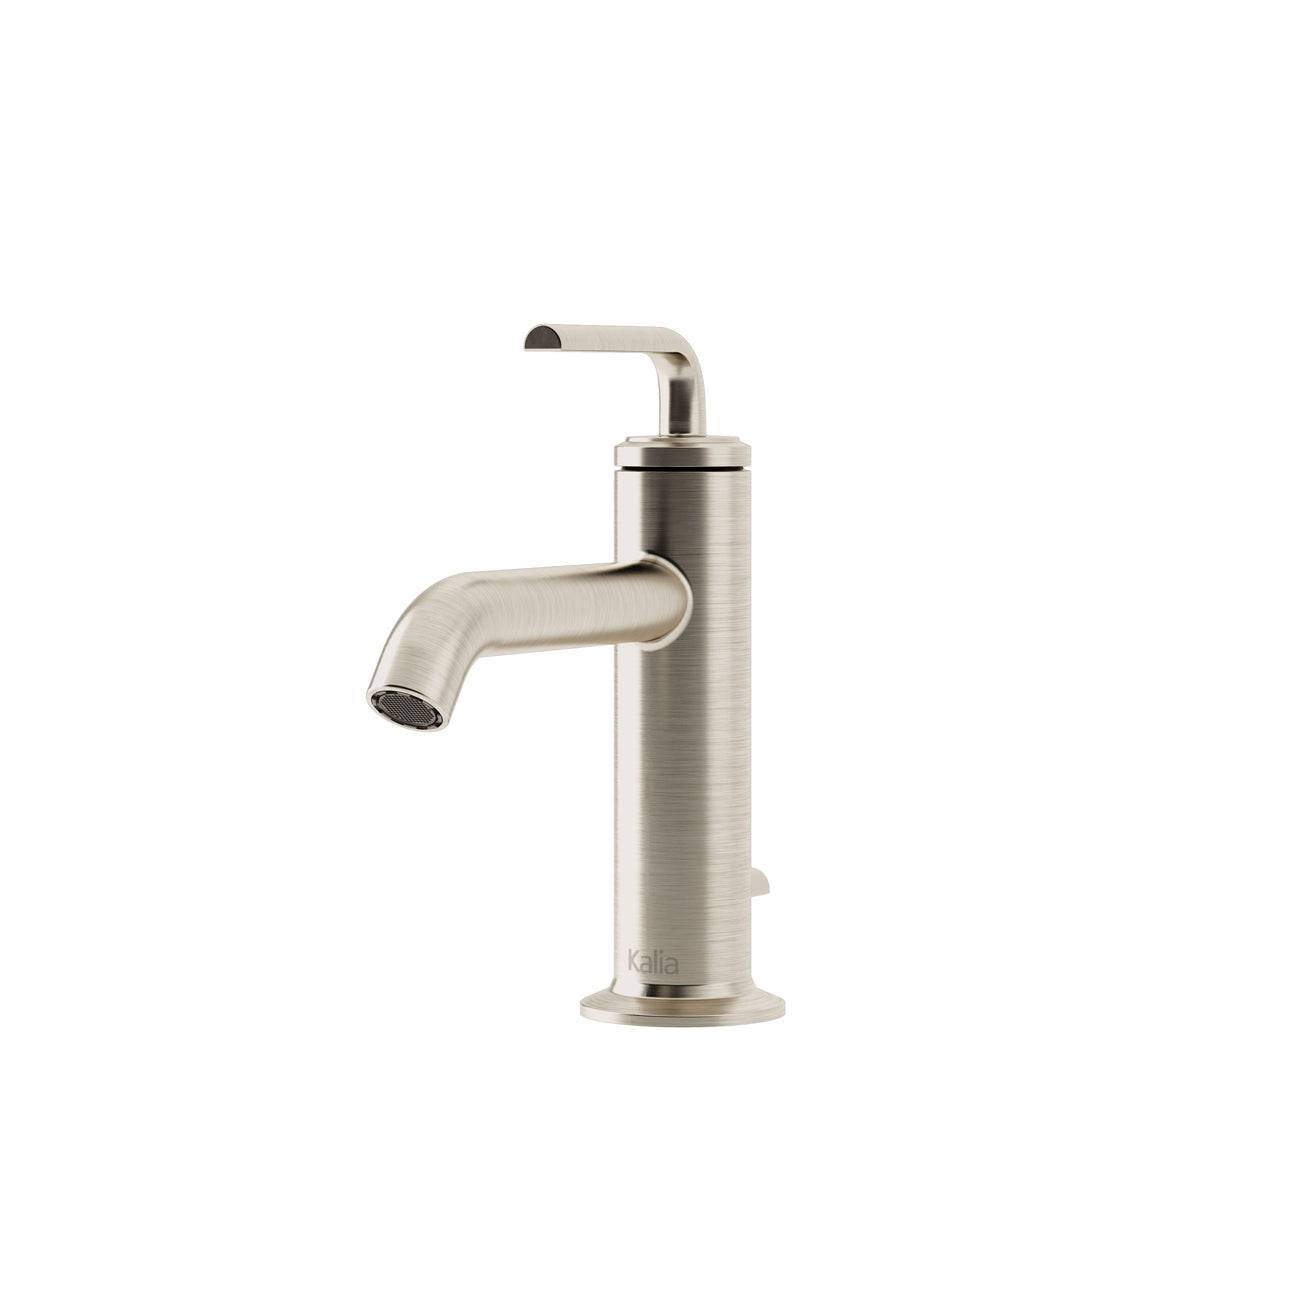 Kalia CITÉ Single Hole 7.5" Lavatory Faucet with Pop-up Drain with Overflow- Brushed Nickel PVD